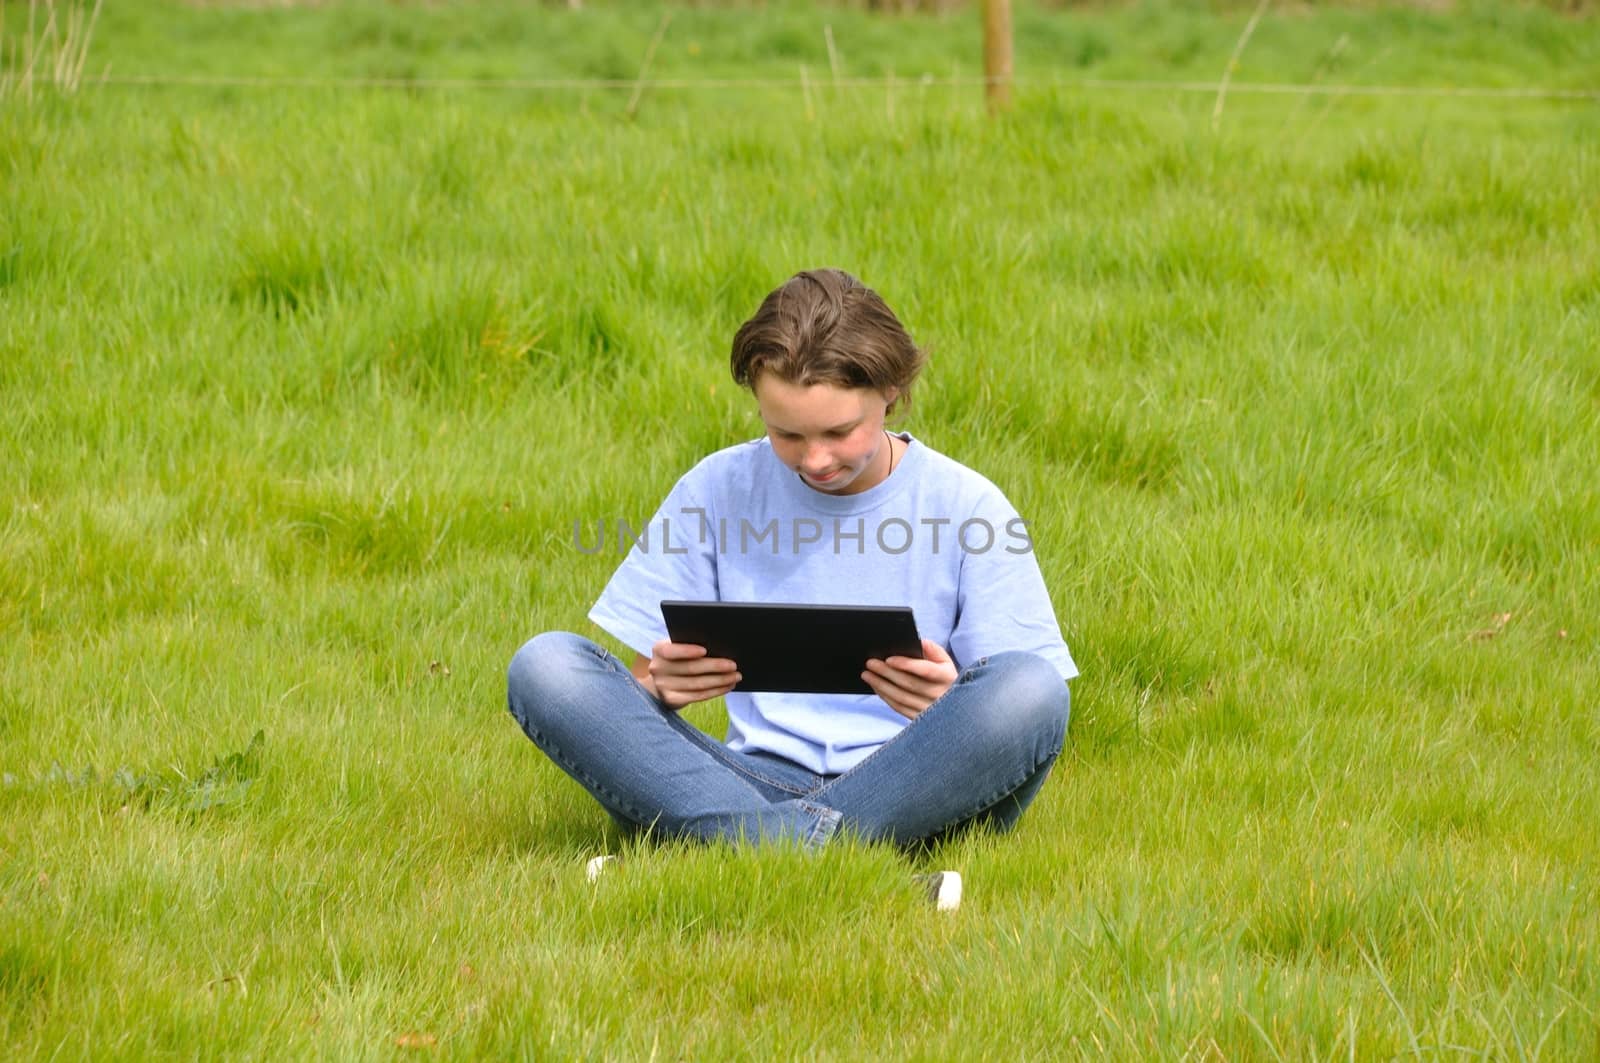 Girl sitting on the lawn and using digital tablet by BZH22